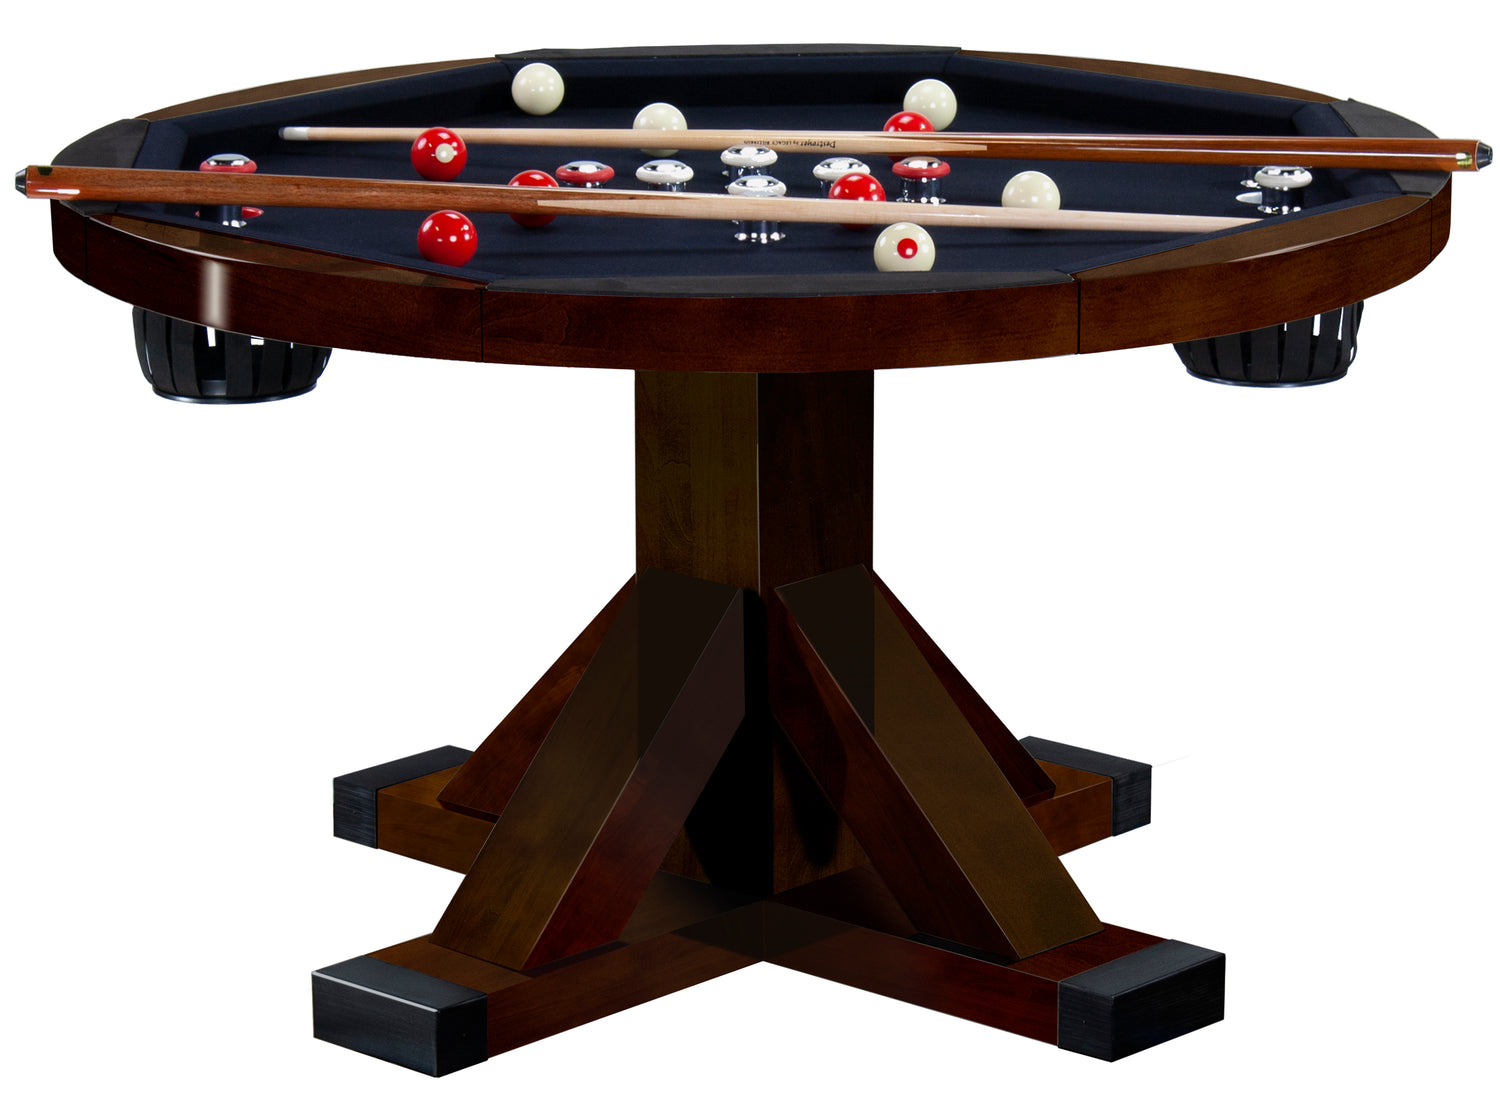 Legacy Billiards Sterling 3 in 1 Game Table with Poker, Dining and Bumper Pool in Nutmeg Finish